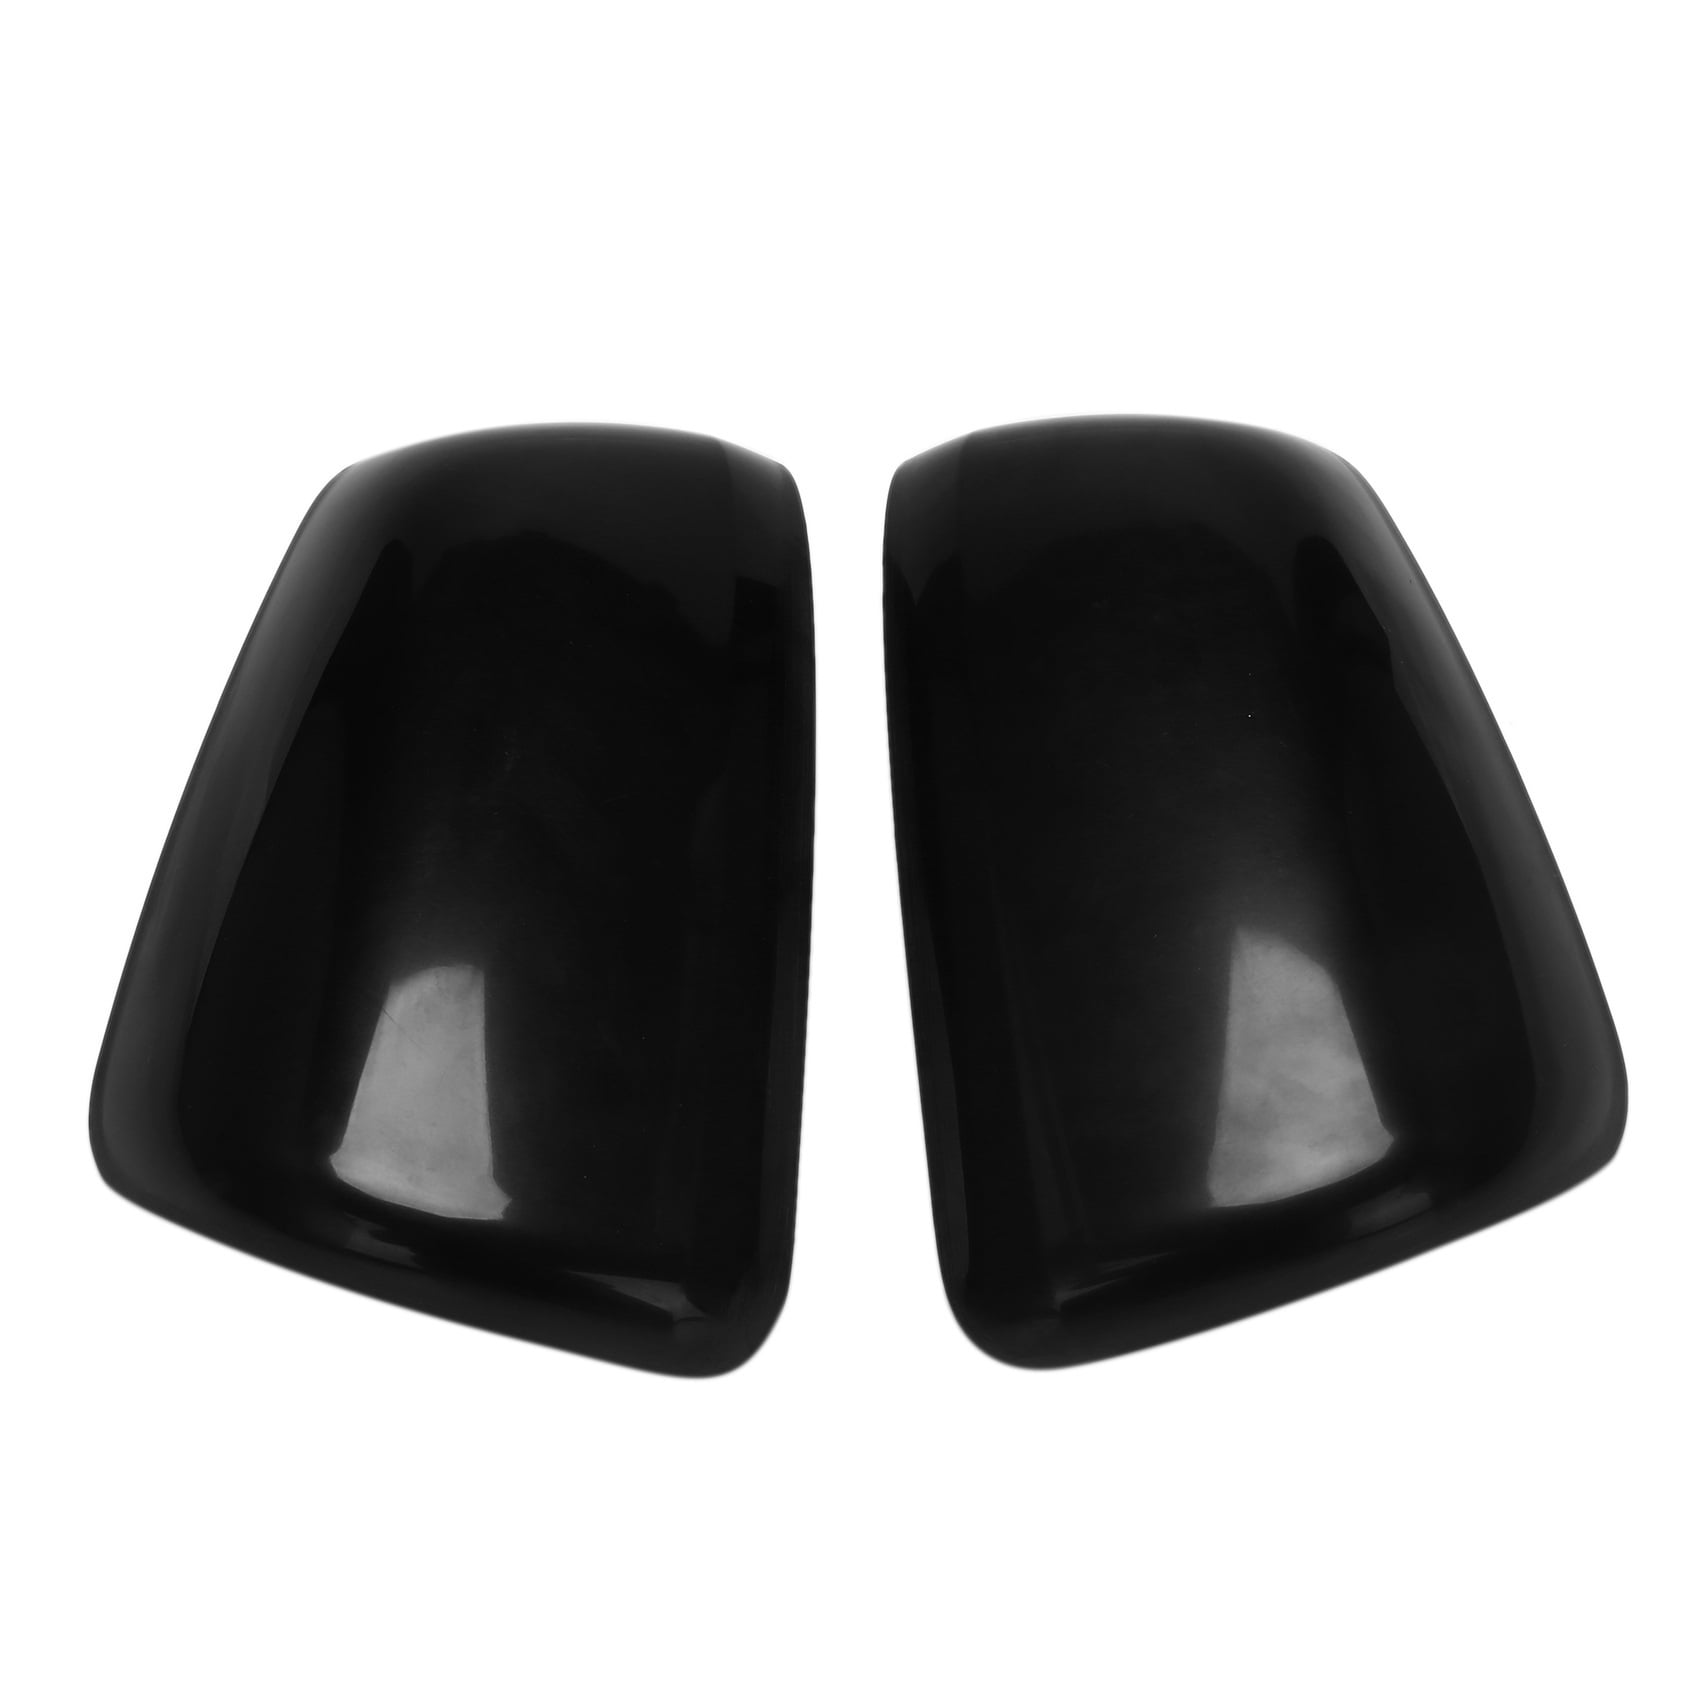 Textured For Passenger Side Ultimate Styling Aftermarket Replacement Wing Mirror Cover Cap Colour Of Cover Black LH Left Hand Side